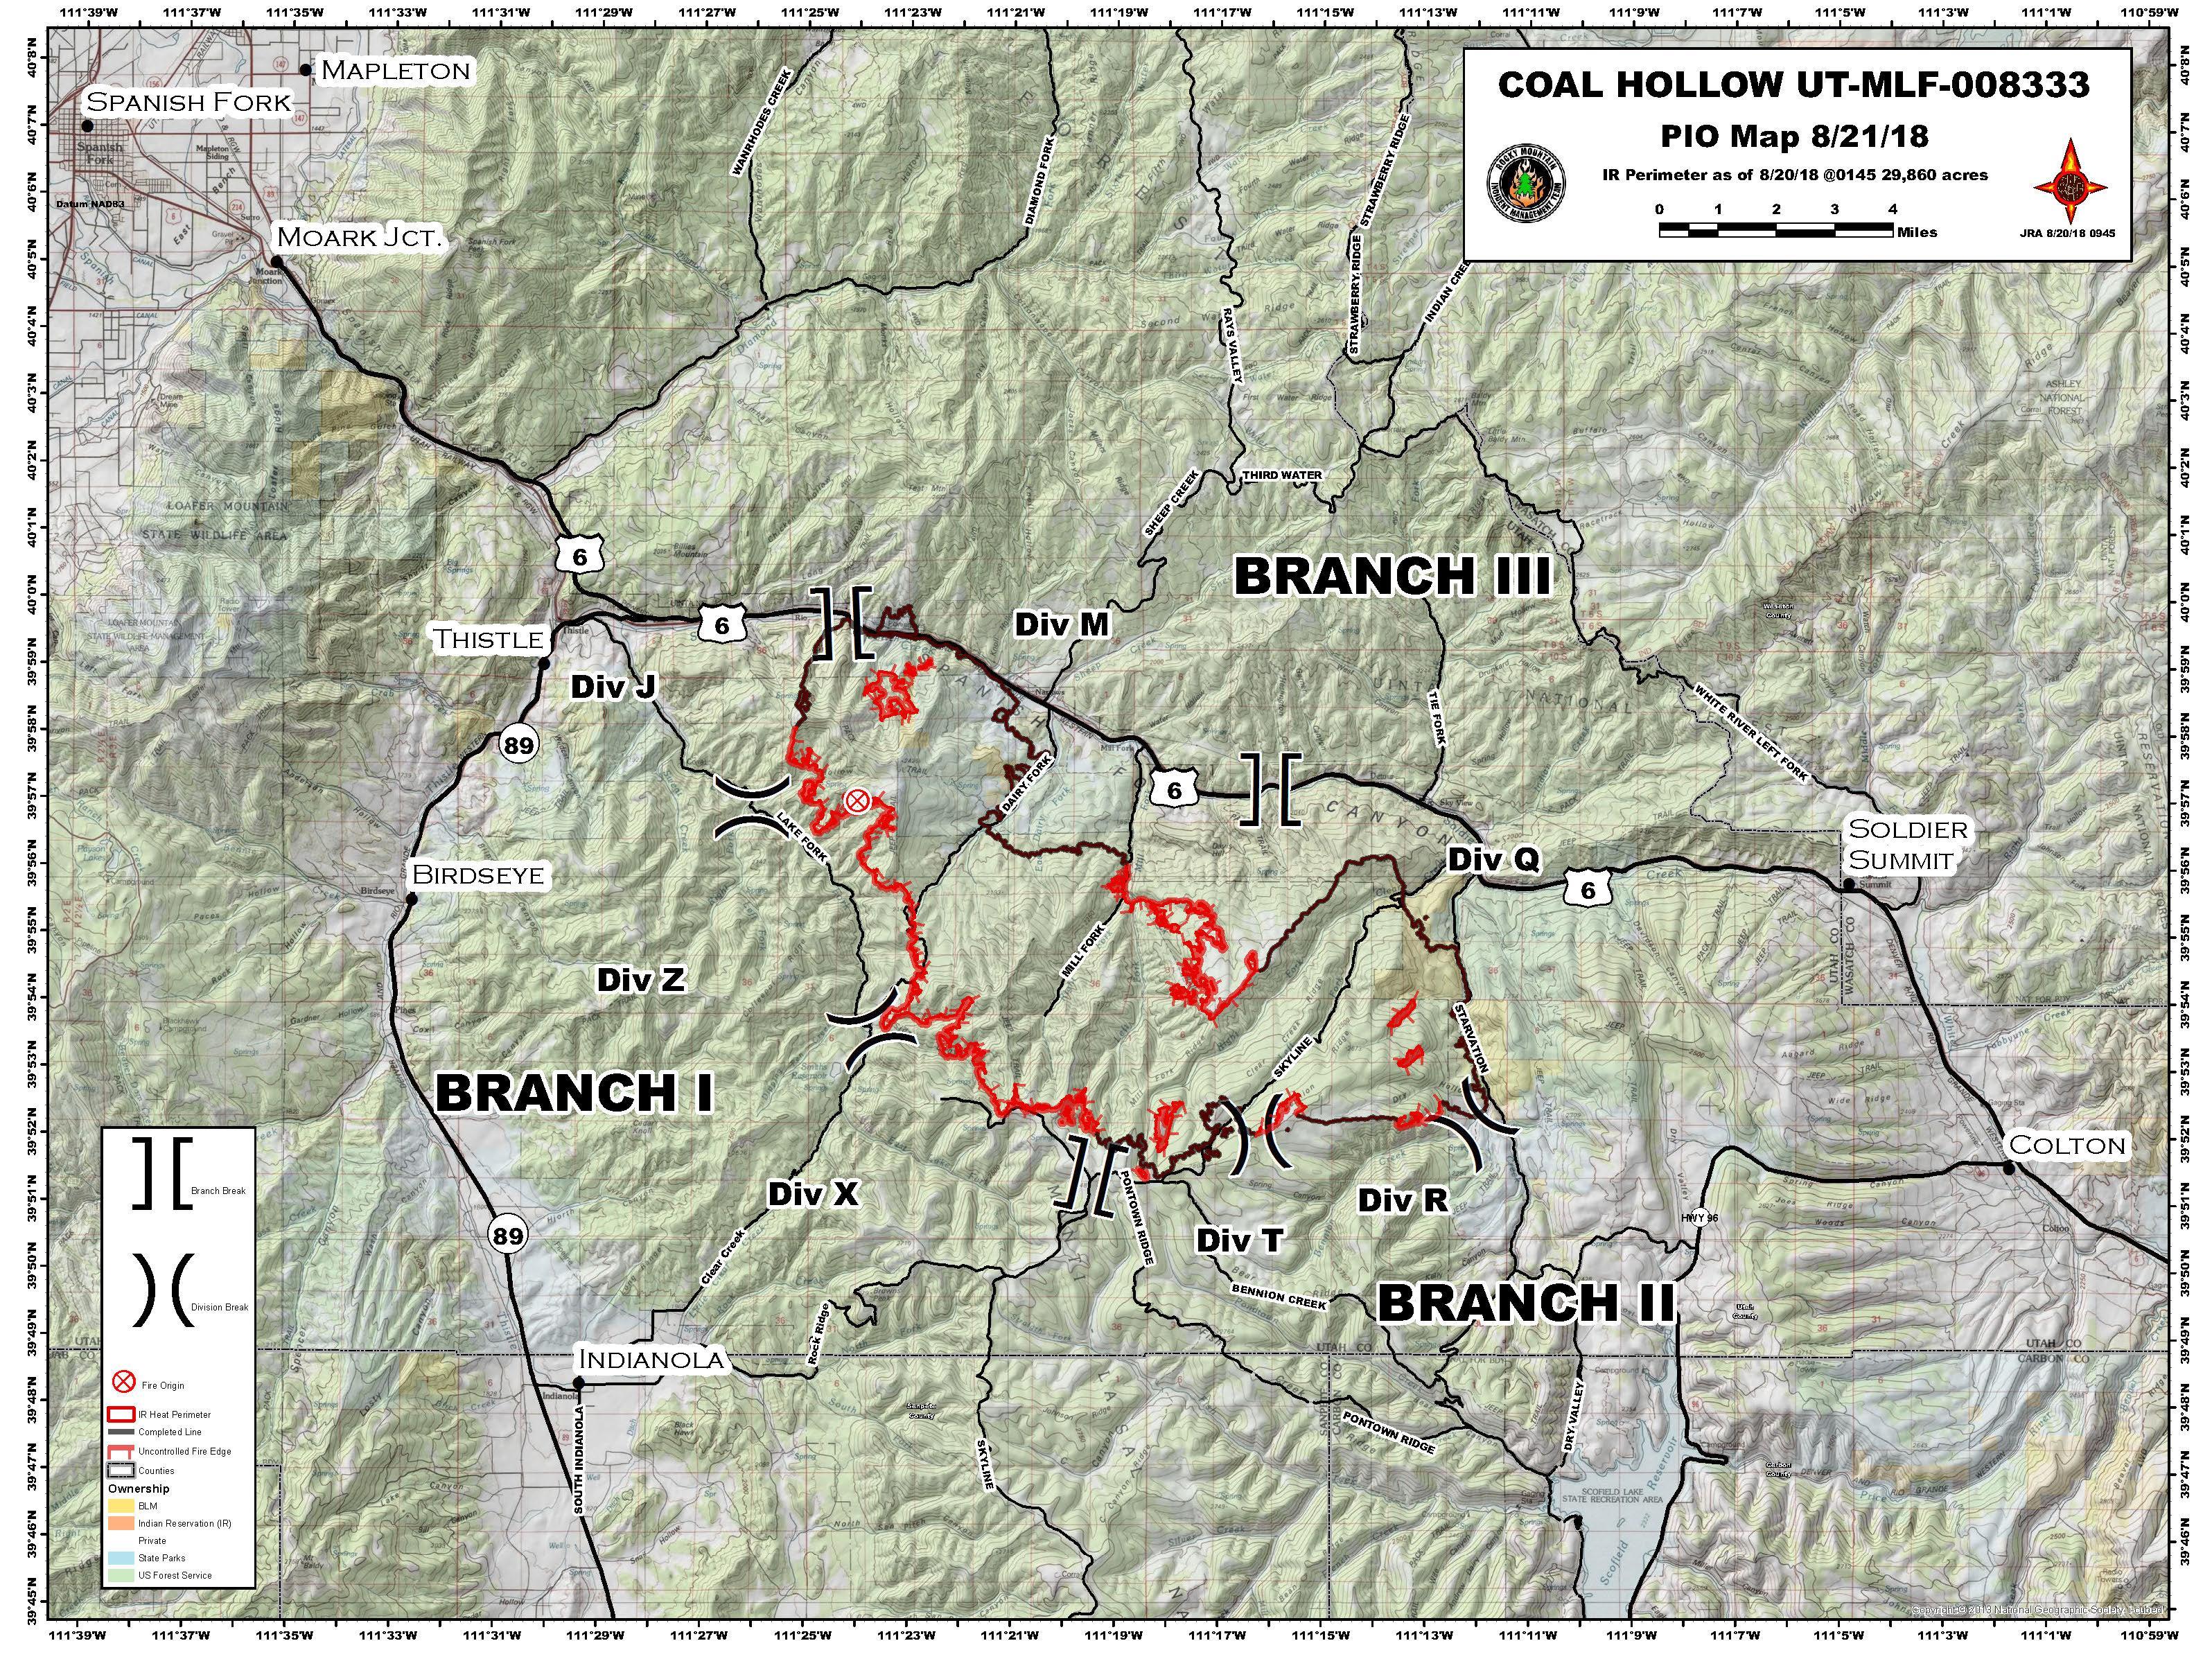 Utah Fire Map Track Fires Near Me Right Now [August 21]